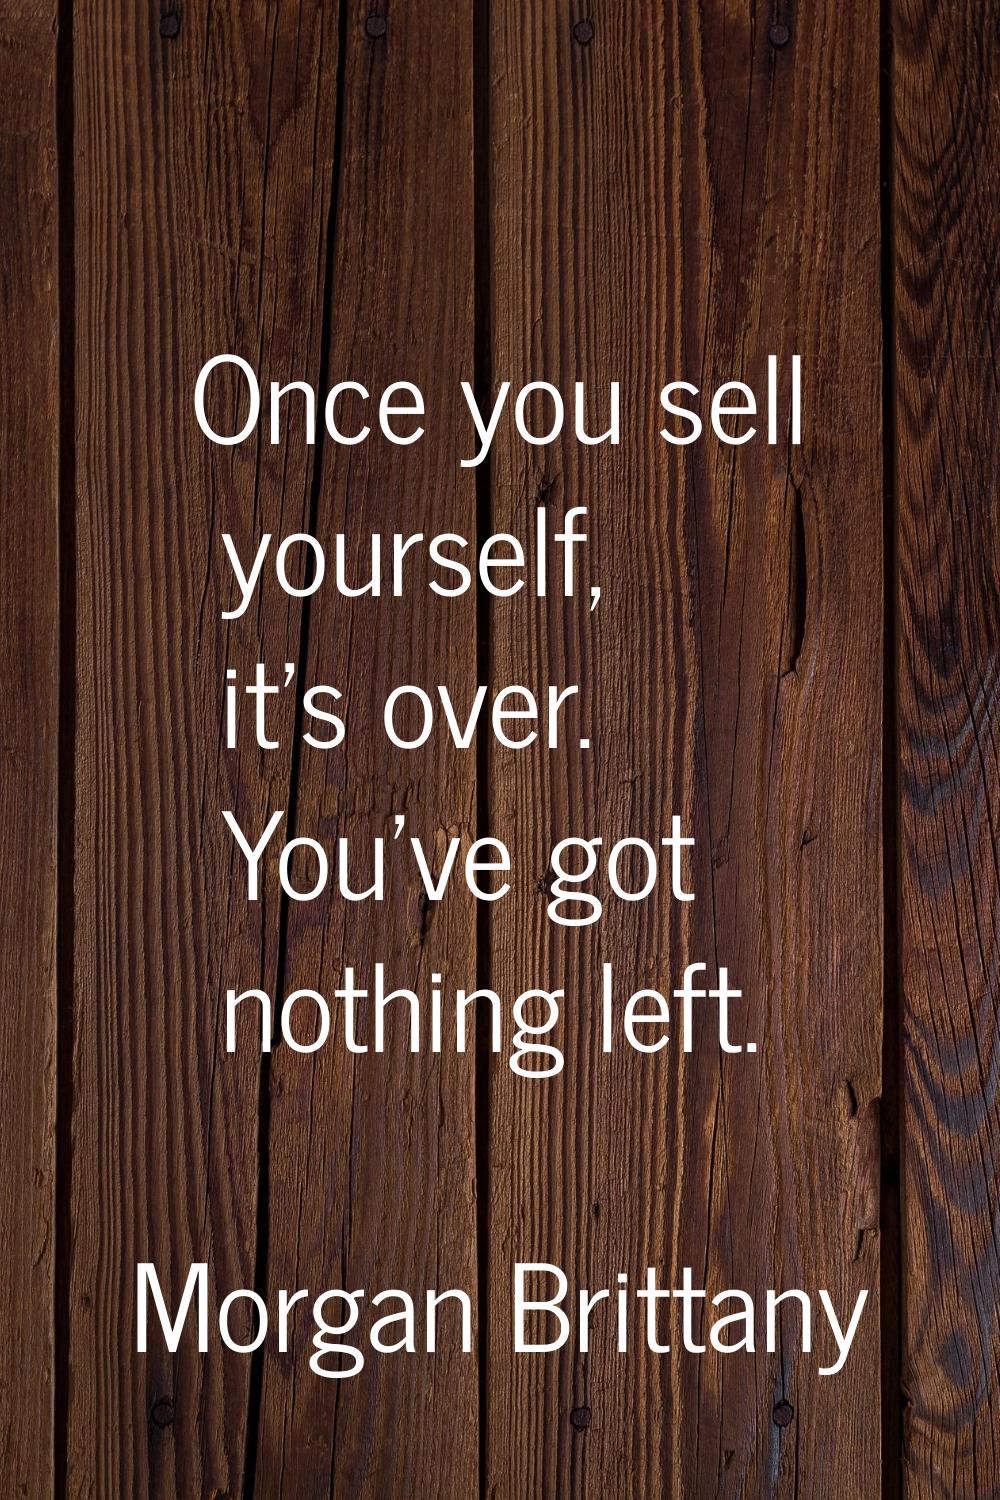 Once you sell yourself, it's over. You've got nothing left.